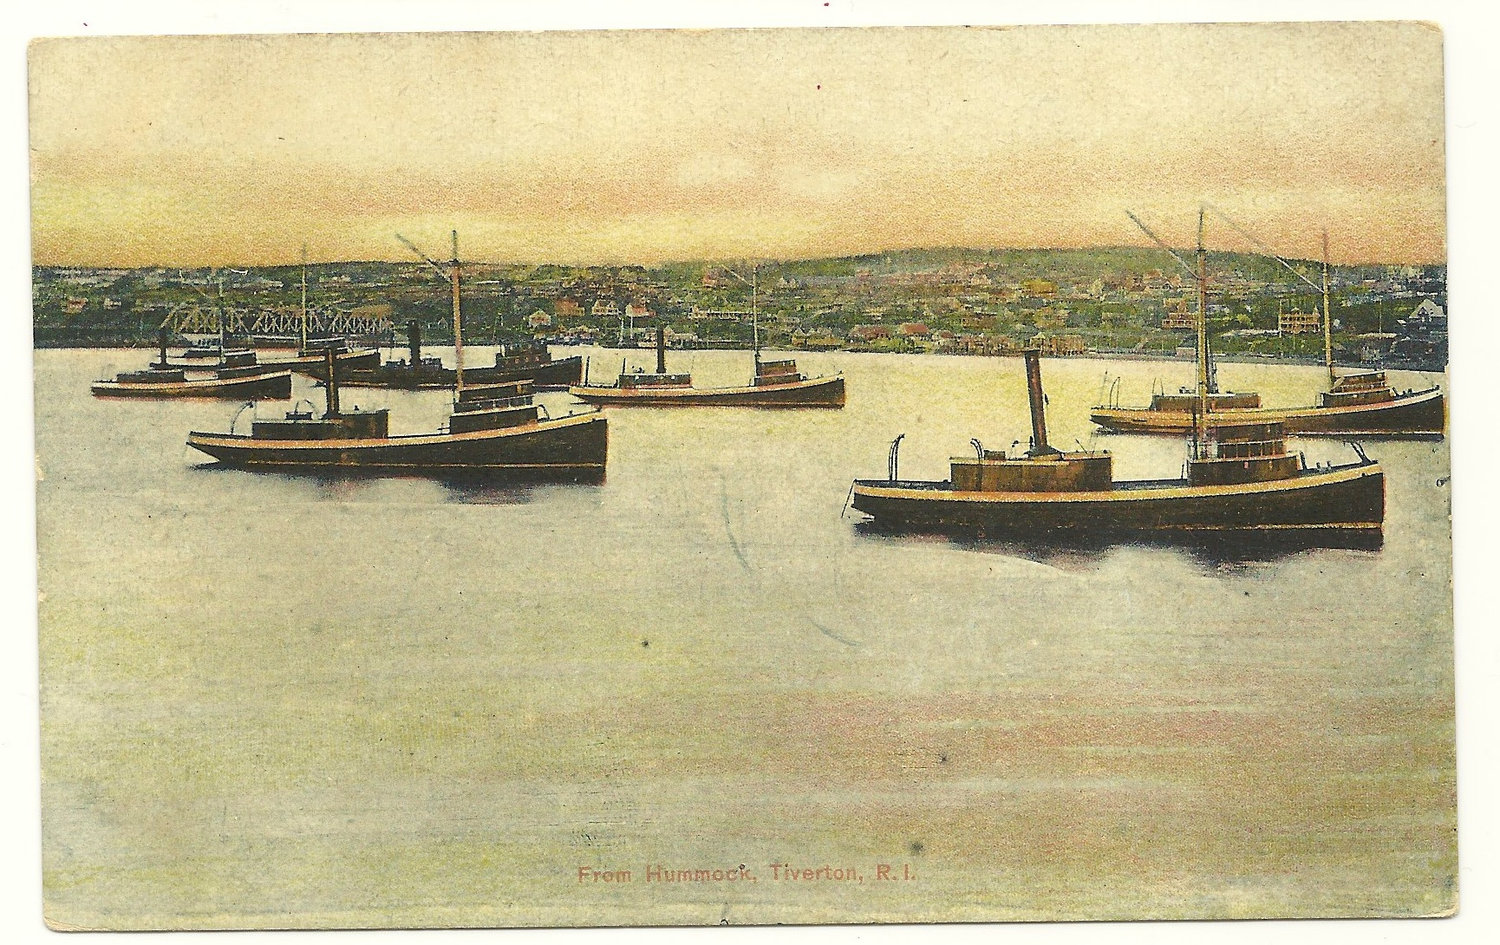 A fleet of pogy fishing boats, owned by the Church brothers, off Common Fence Point in the early part of the 20th century. The family had a large-scale fish processing plant, known as Narragansett Oil Works and other names, that operated from the 1860s through the 1920s.